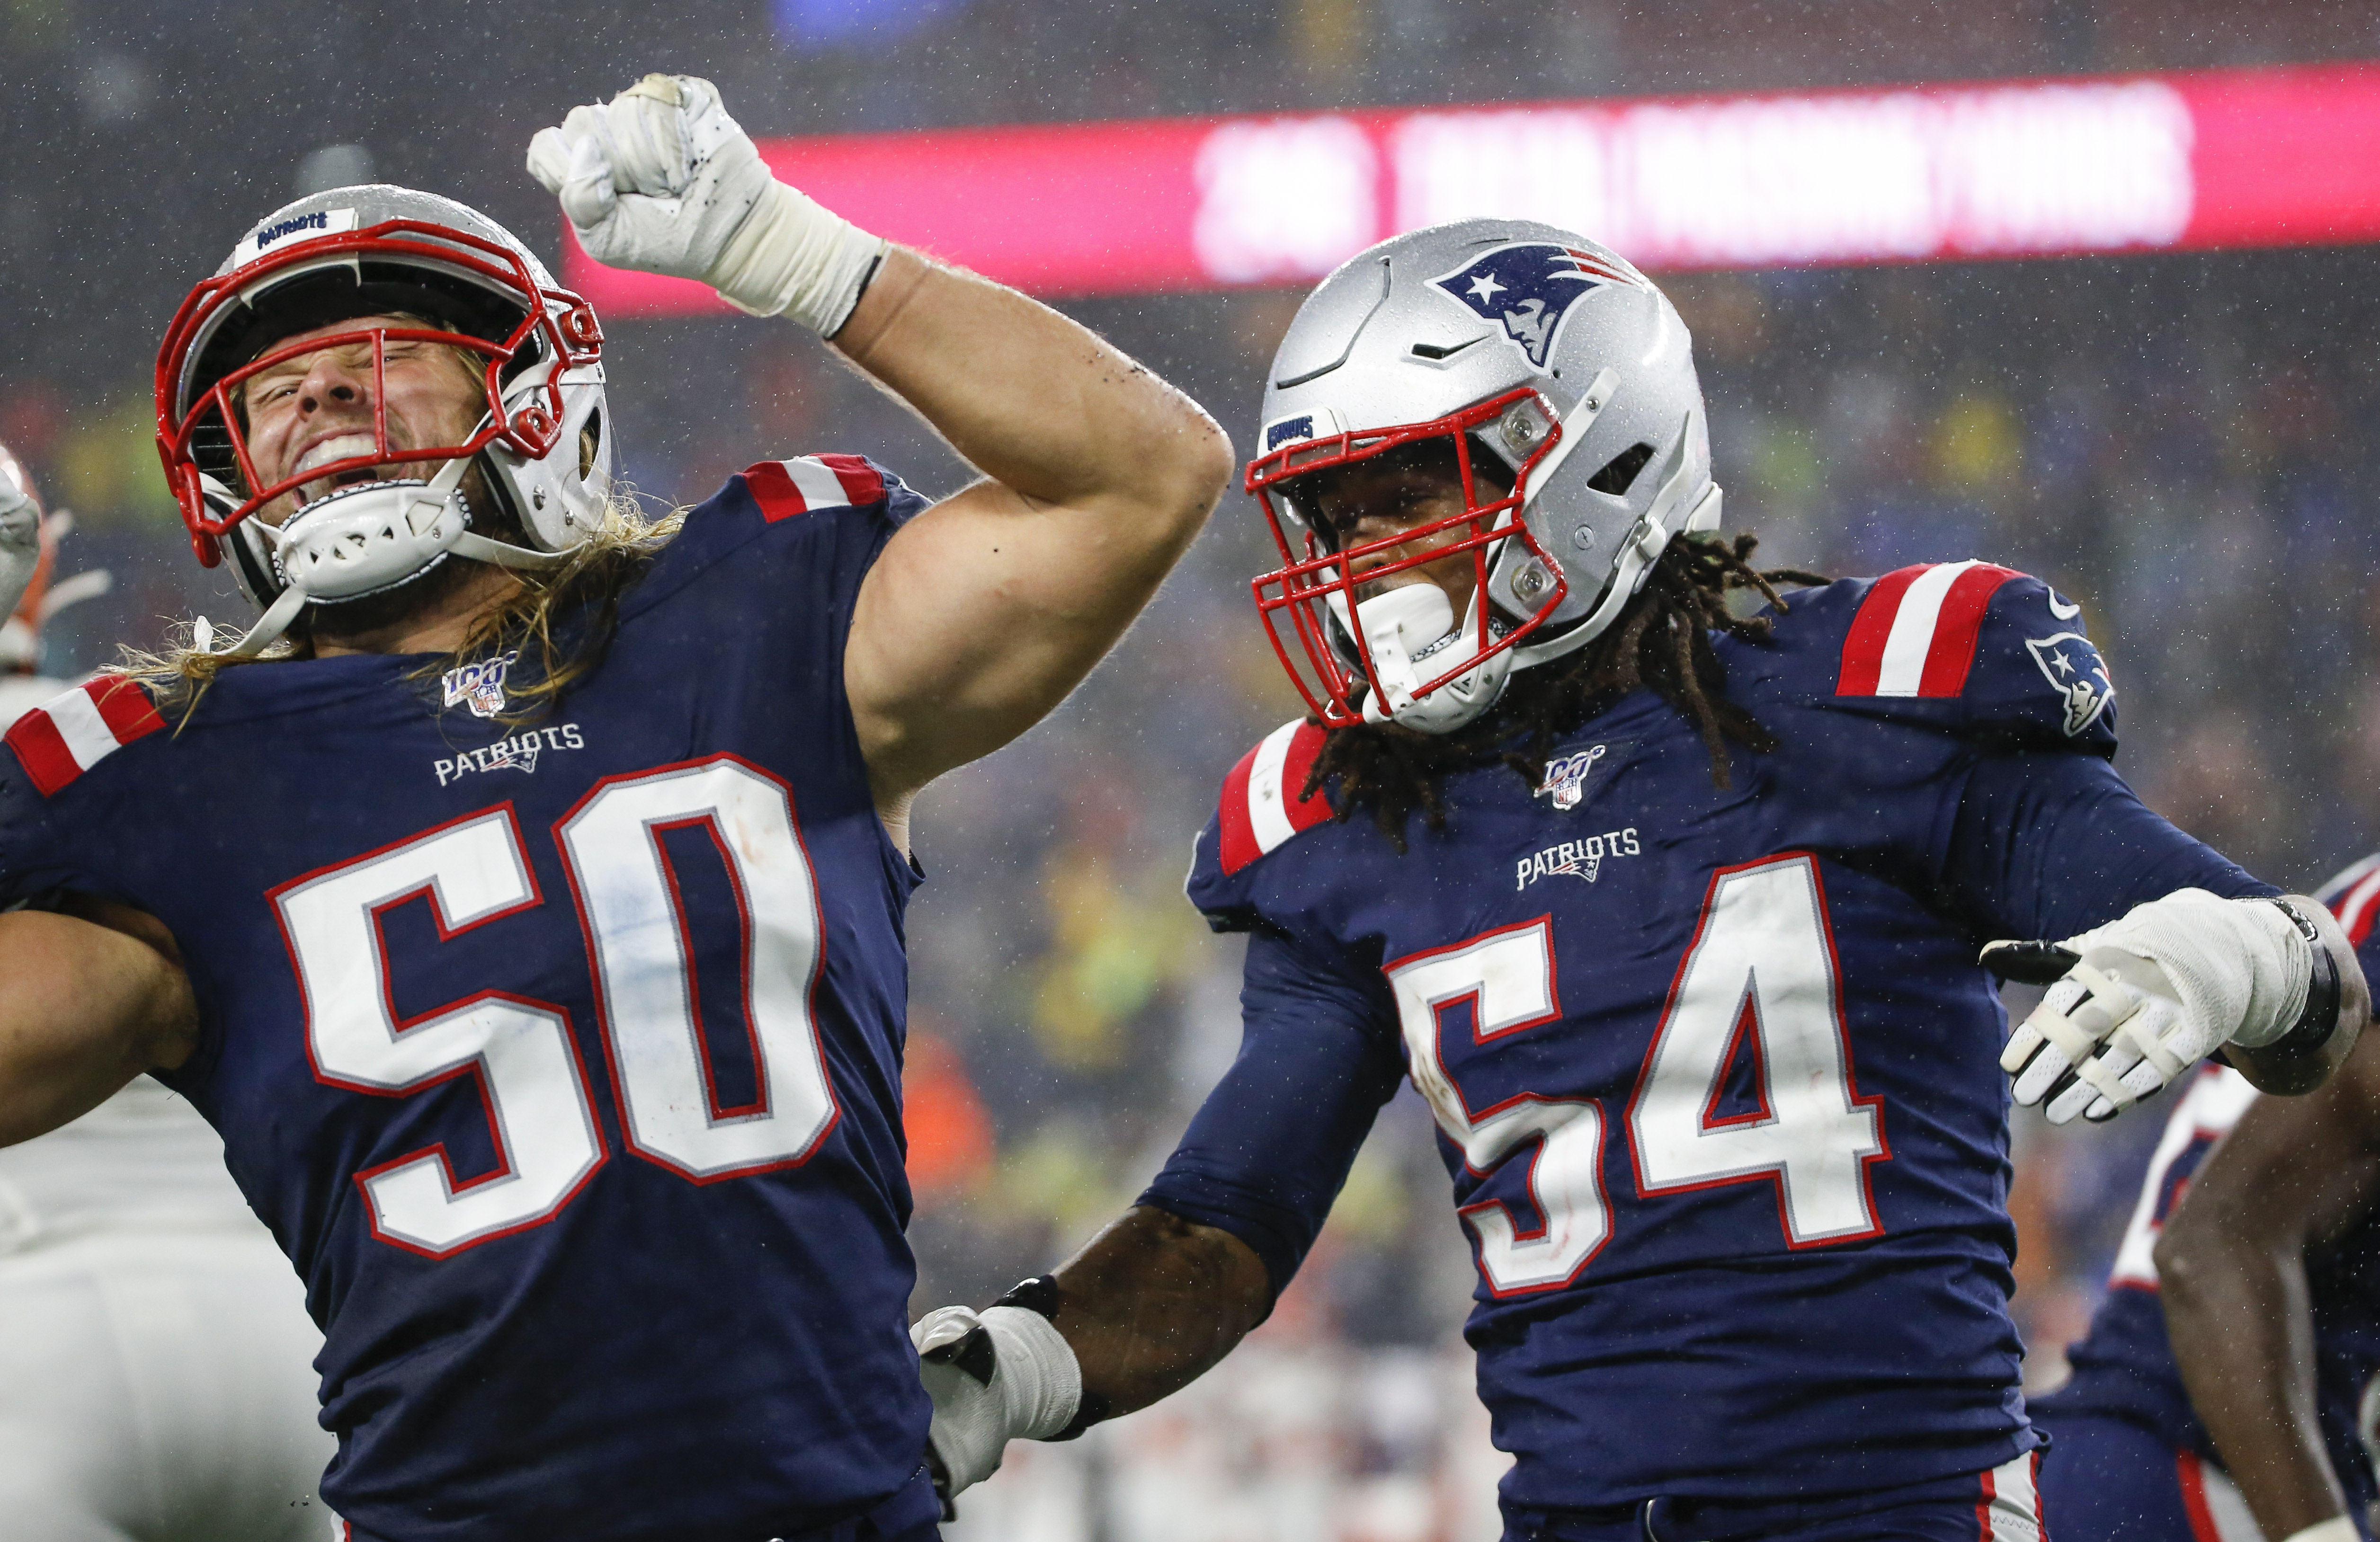 Patriots Defense Is Exceptional at Pressuring QBs Without Extra Rushers